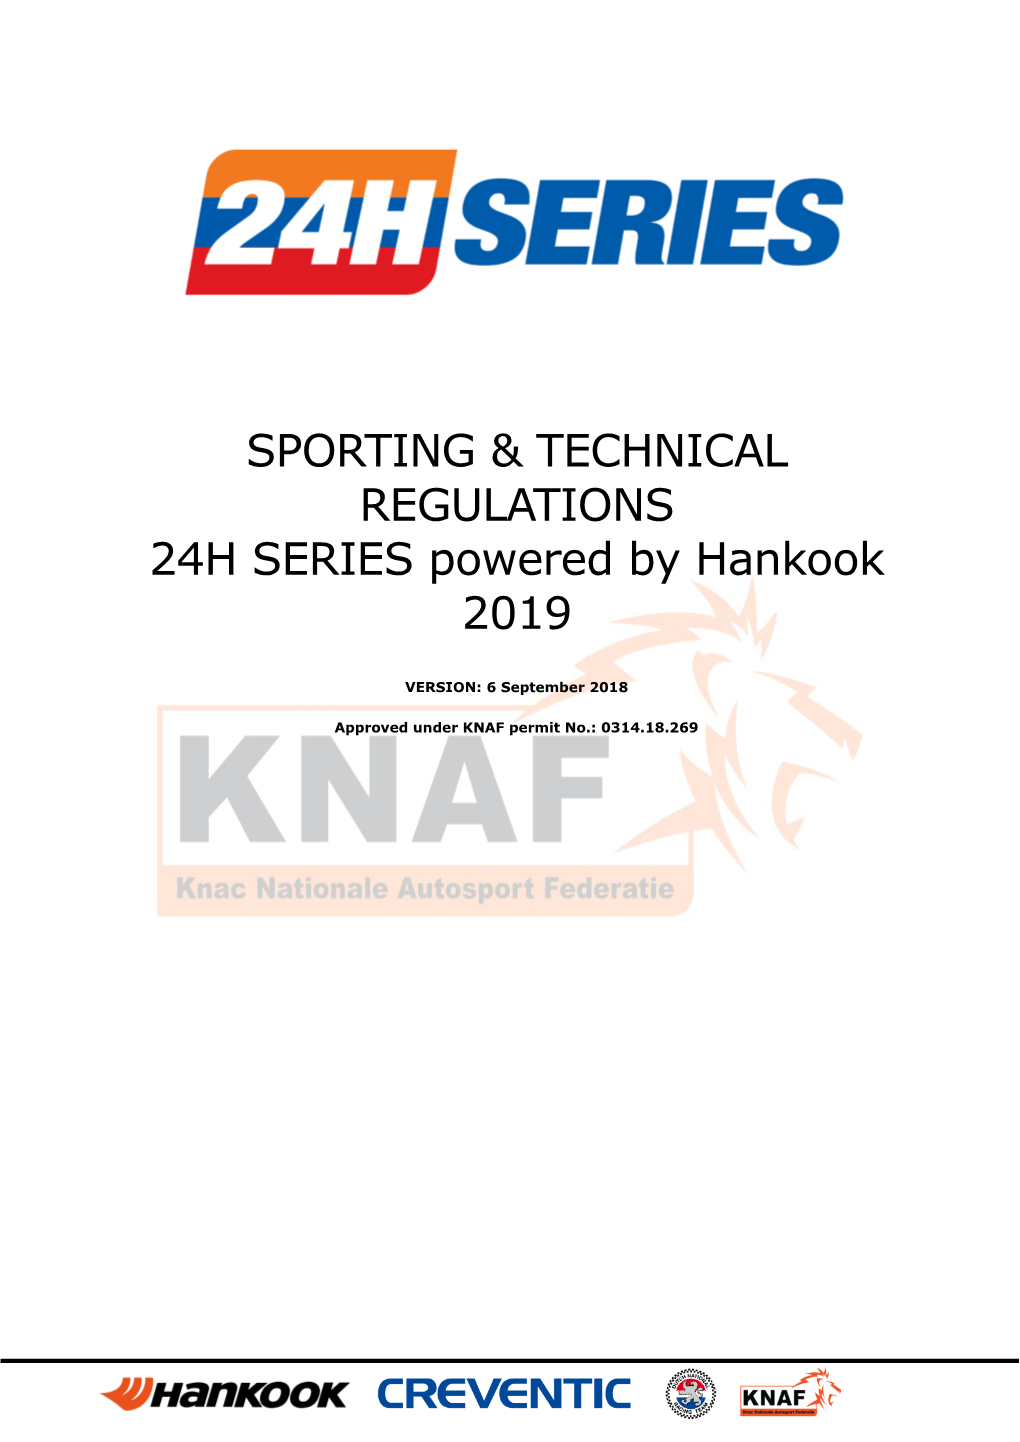 Sporting & Technical Regulations 24H Series